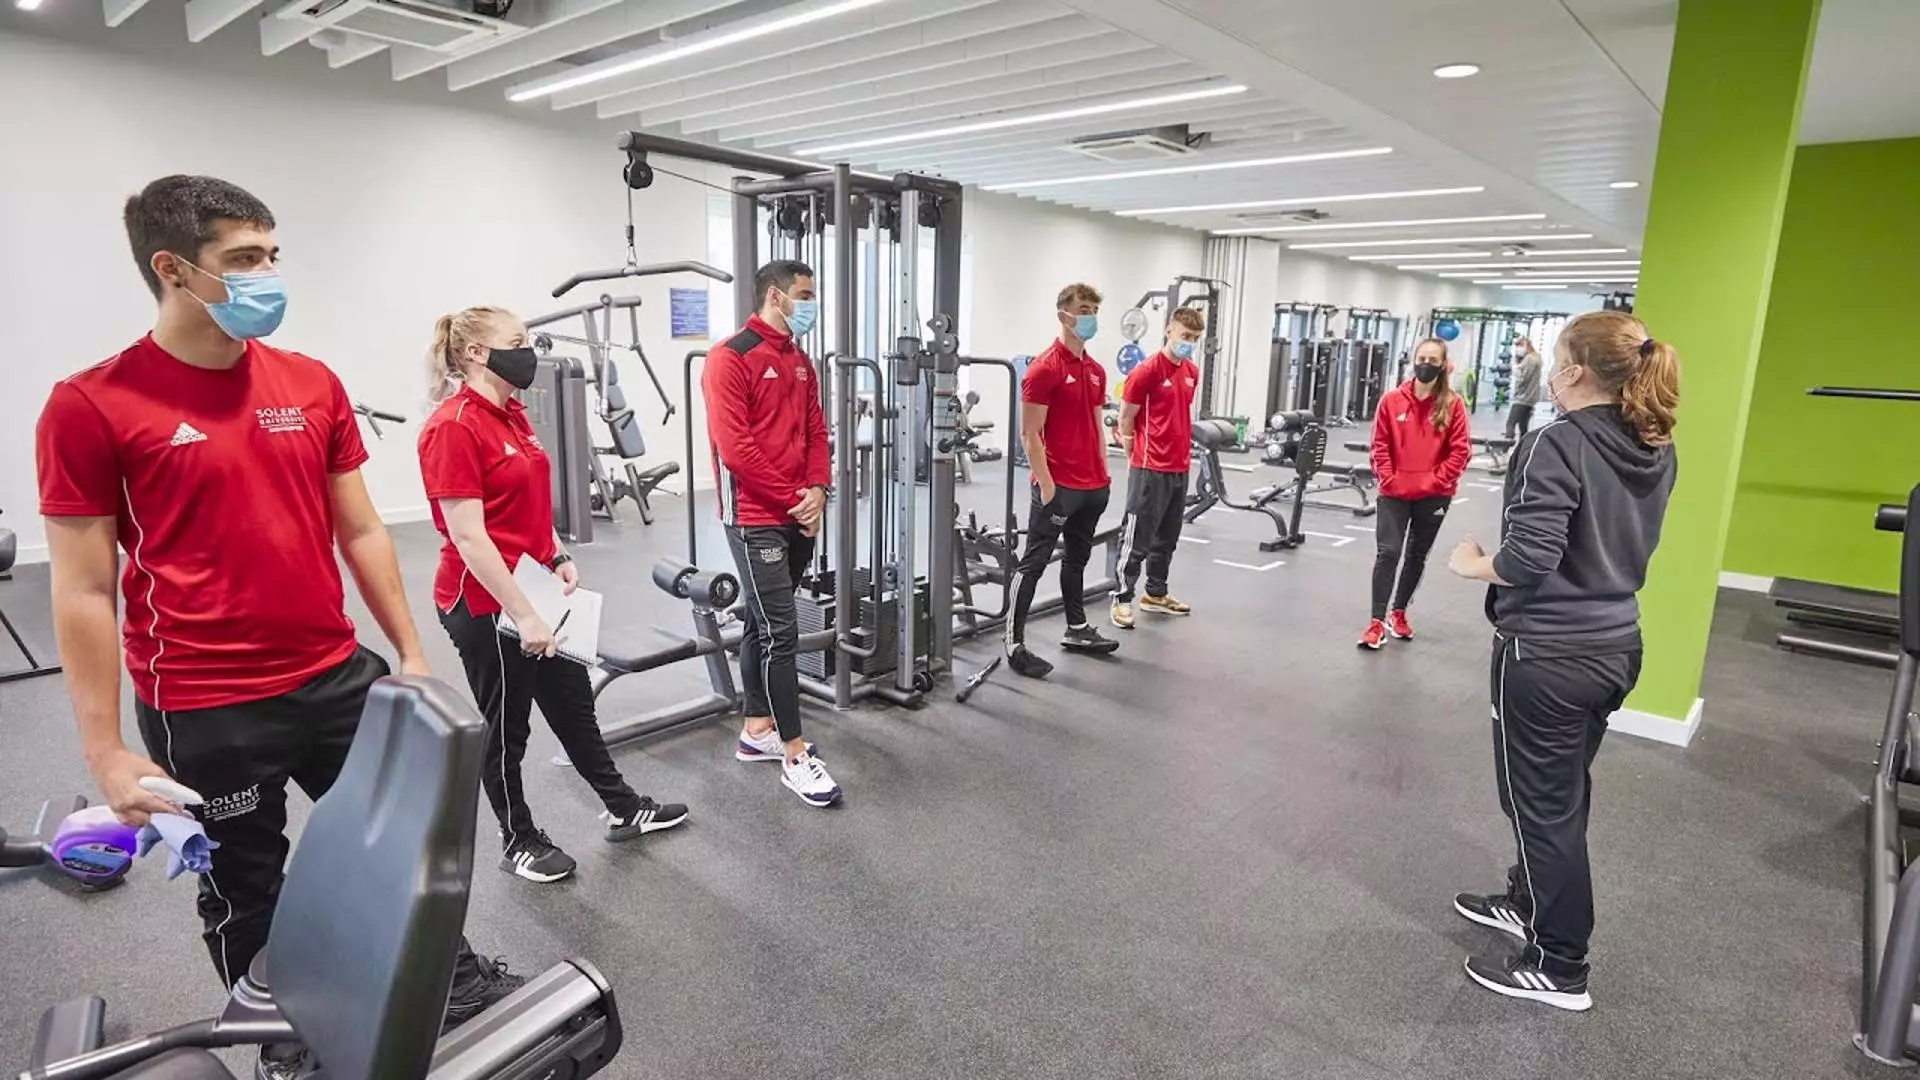 BSc (Hons) Sport Management students stood in Solent University sports uniform, wearing face masks, being taught by a lecturer in the gym at Solent's Sport Complex.